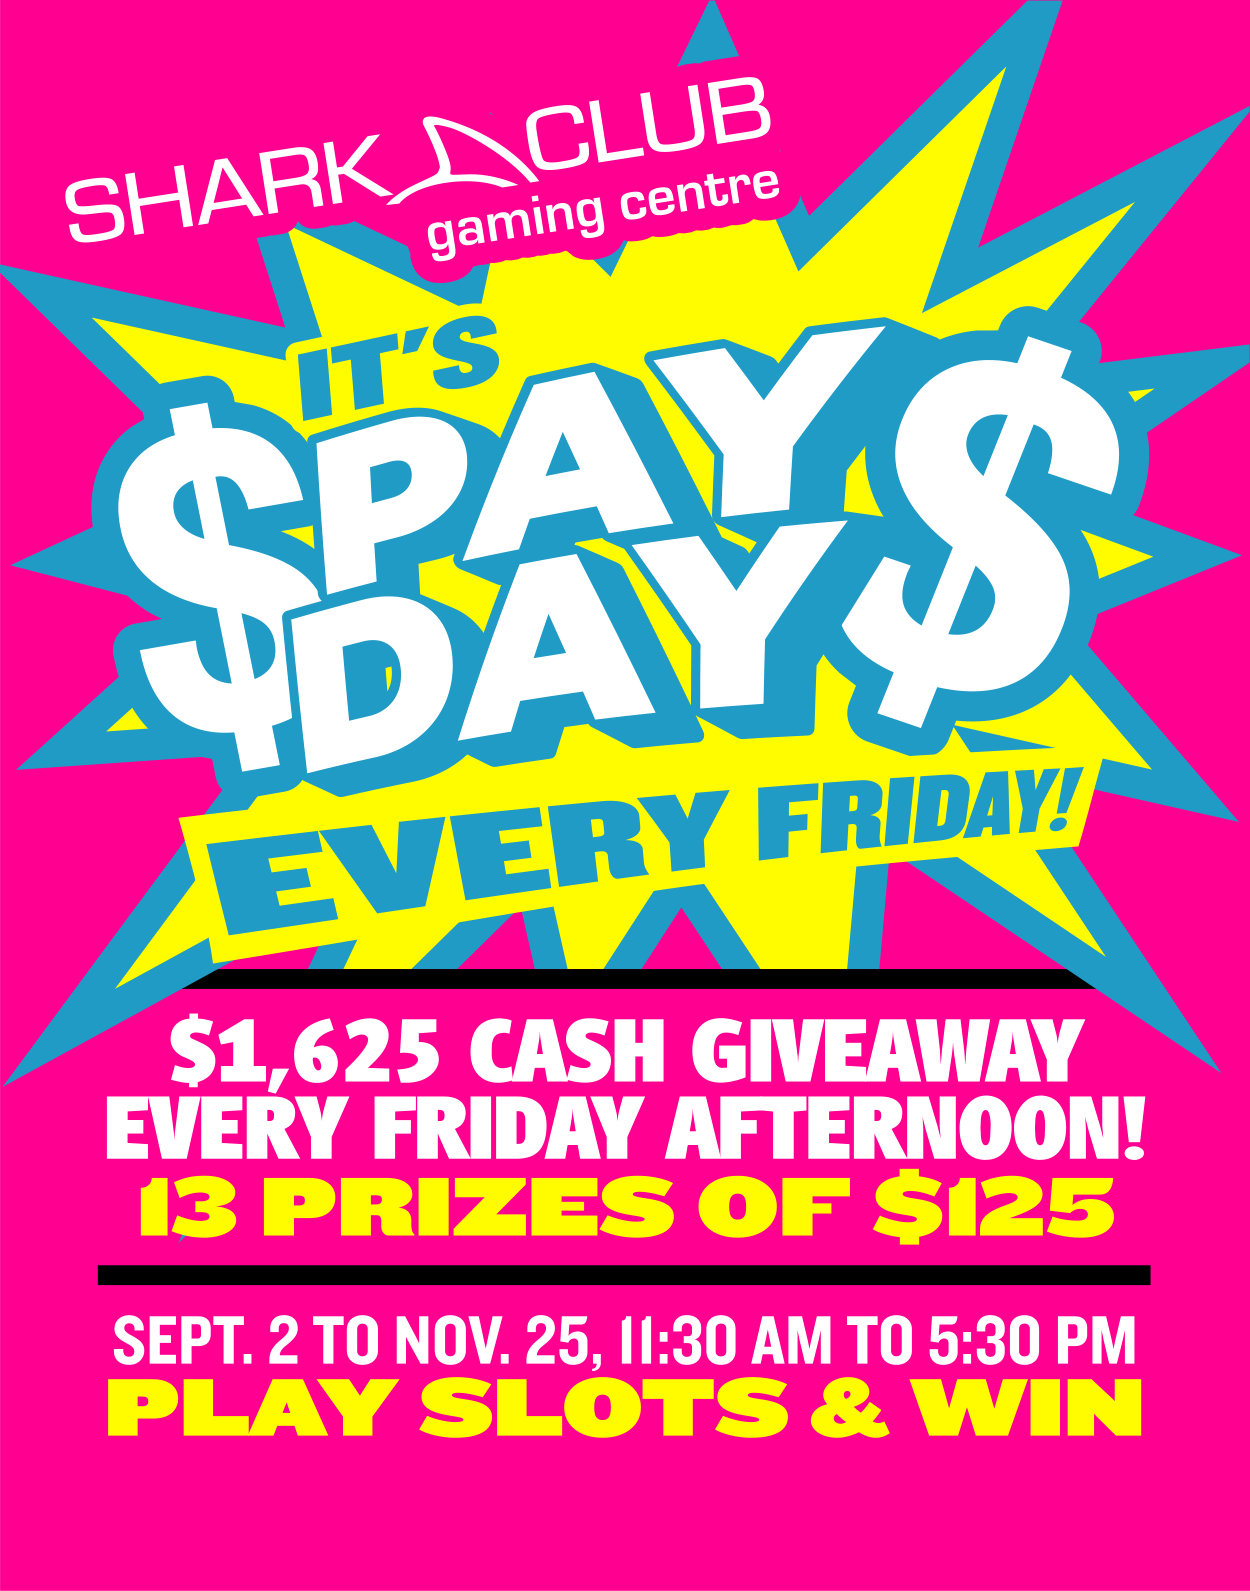 $1,625 Cash Giveaway every Friday afternoon! 13 Prizes of $125, September 2 to November 25, 11:30 am to 5:30 pm